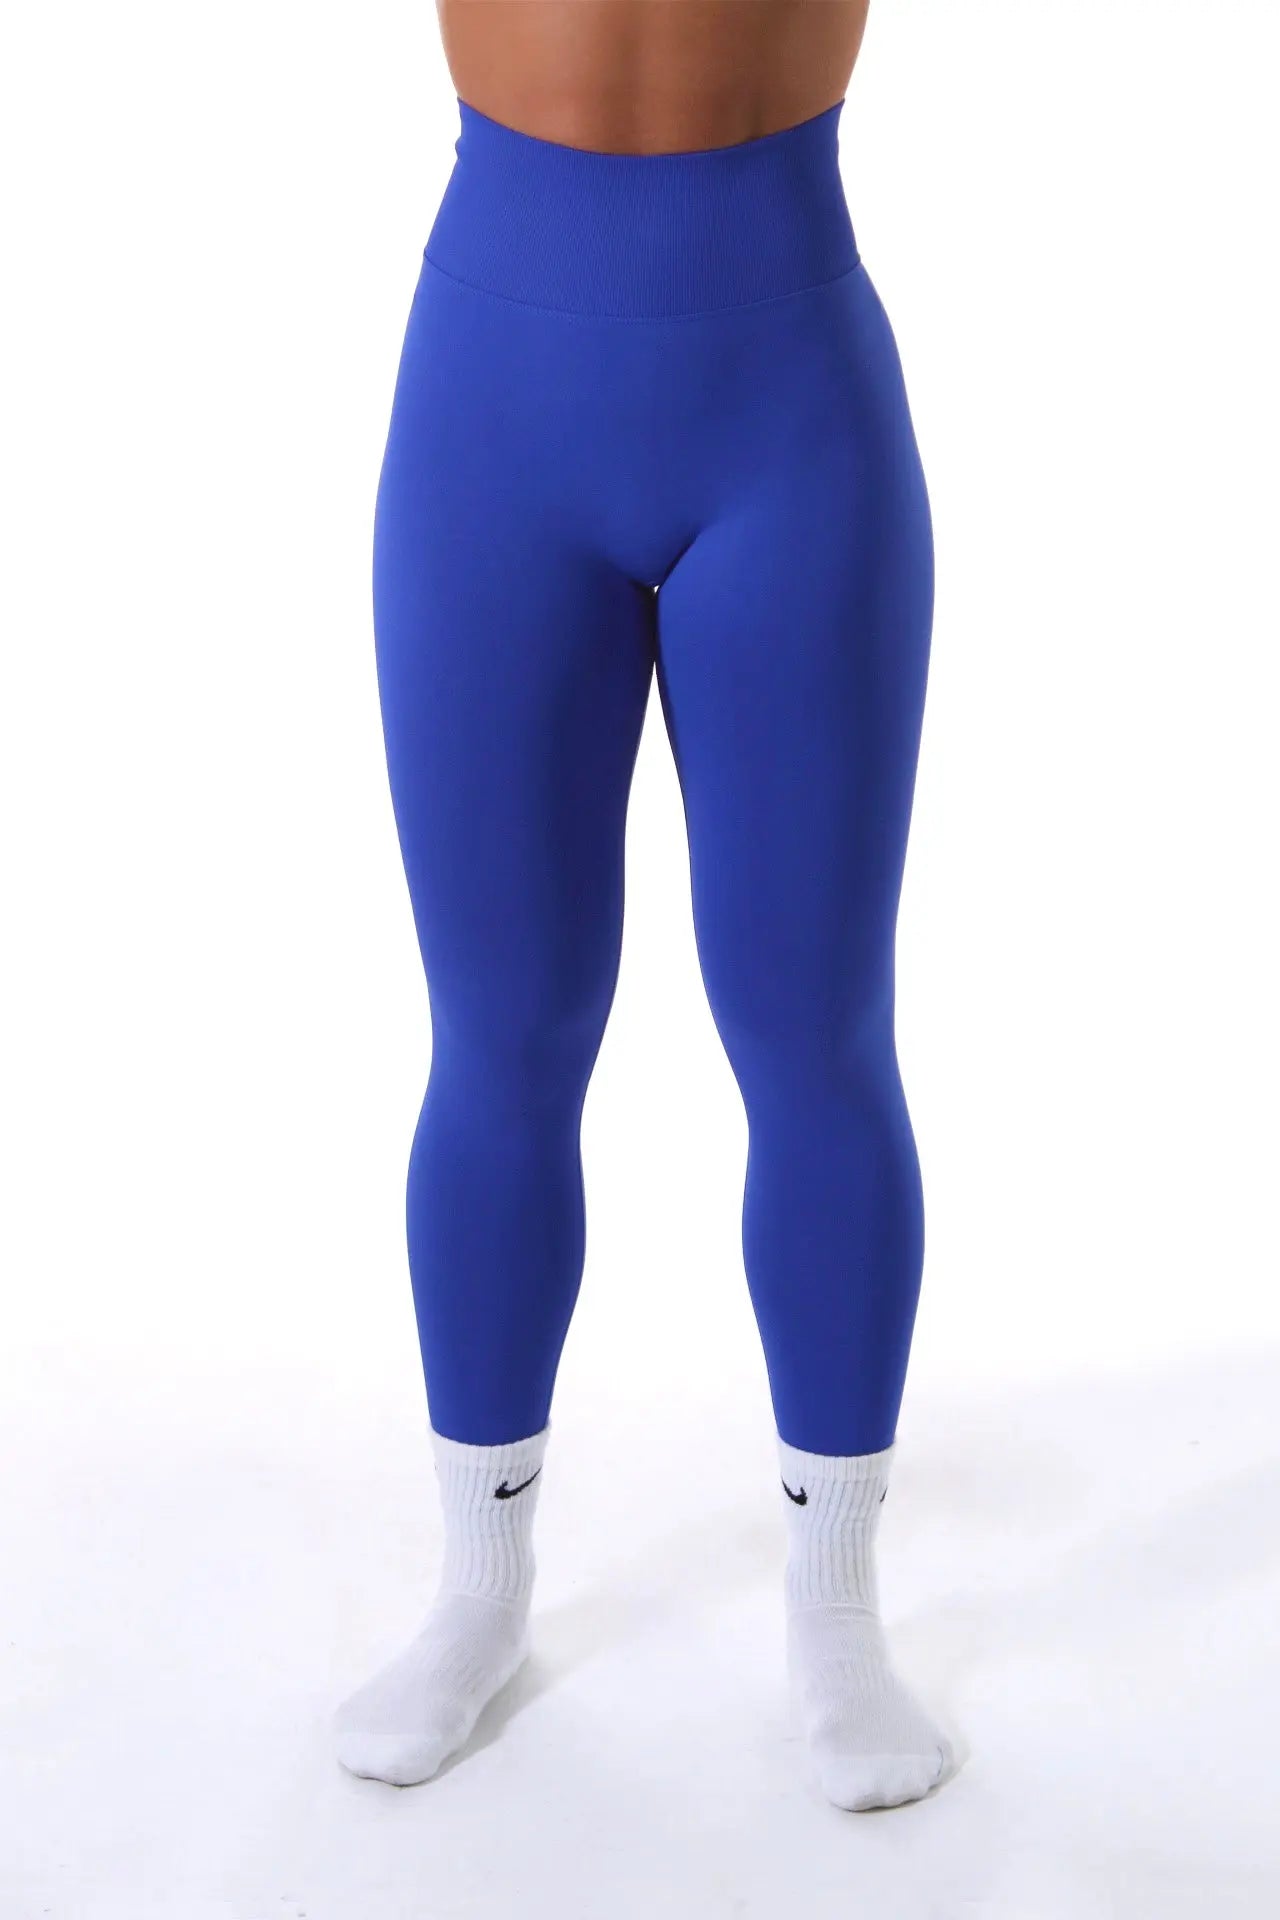 Summer Luxe Collection in Blue Scrunch Bum Gym Leggings